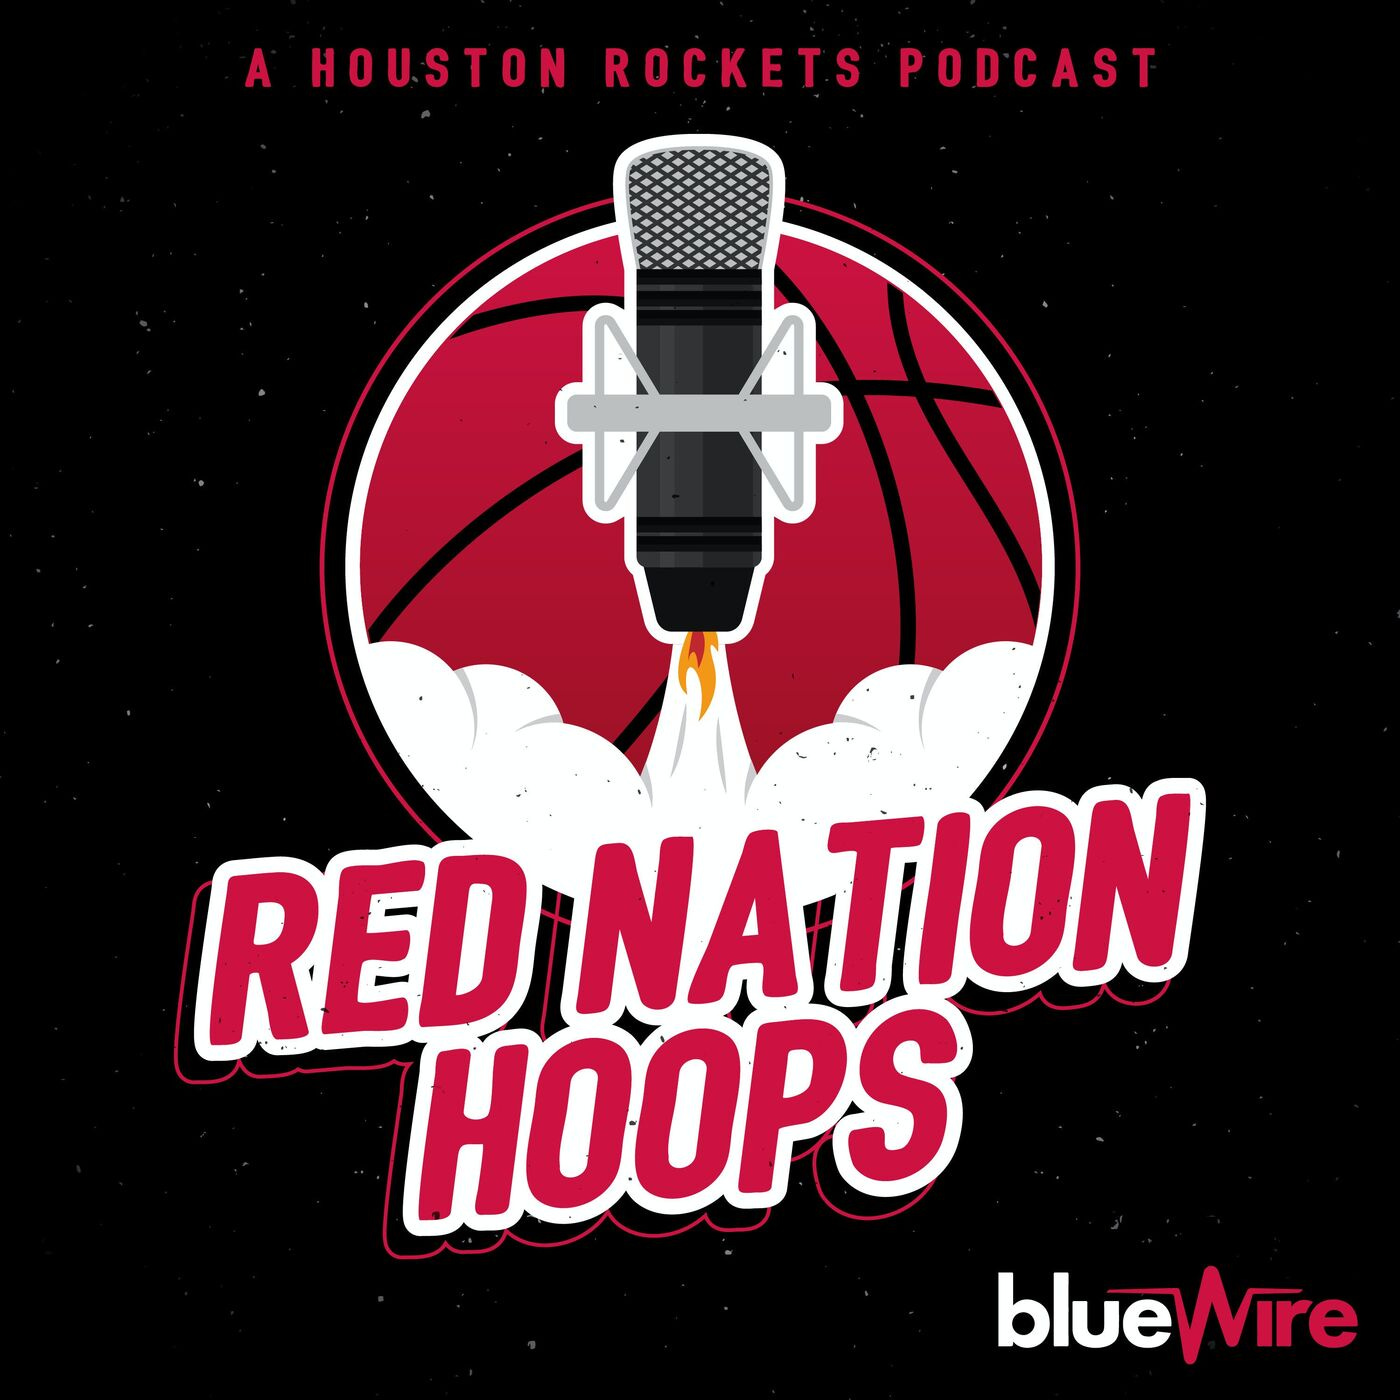 Ep. 124: LeBron's comments on Morey, Gerald Green news, Harden's MVP buzz, and more